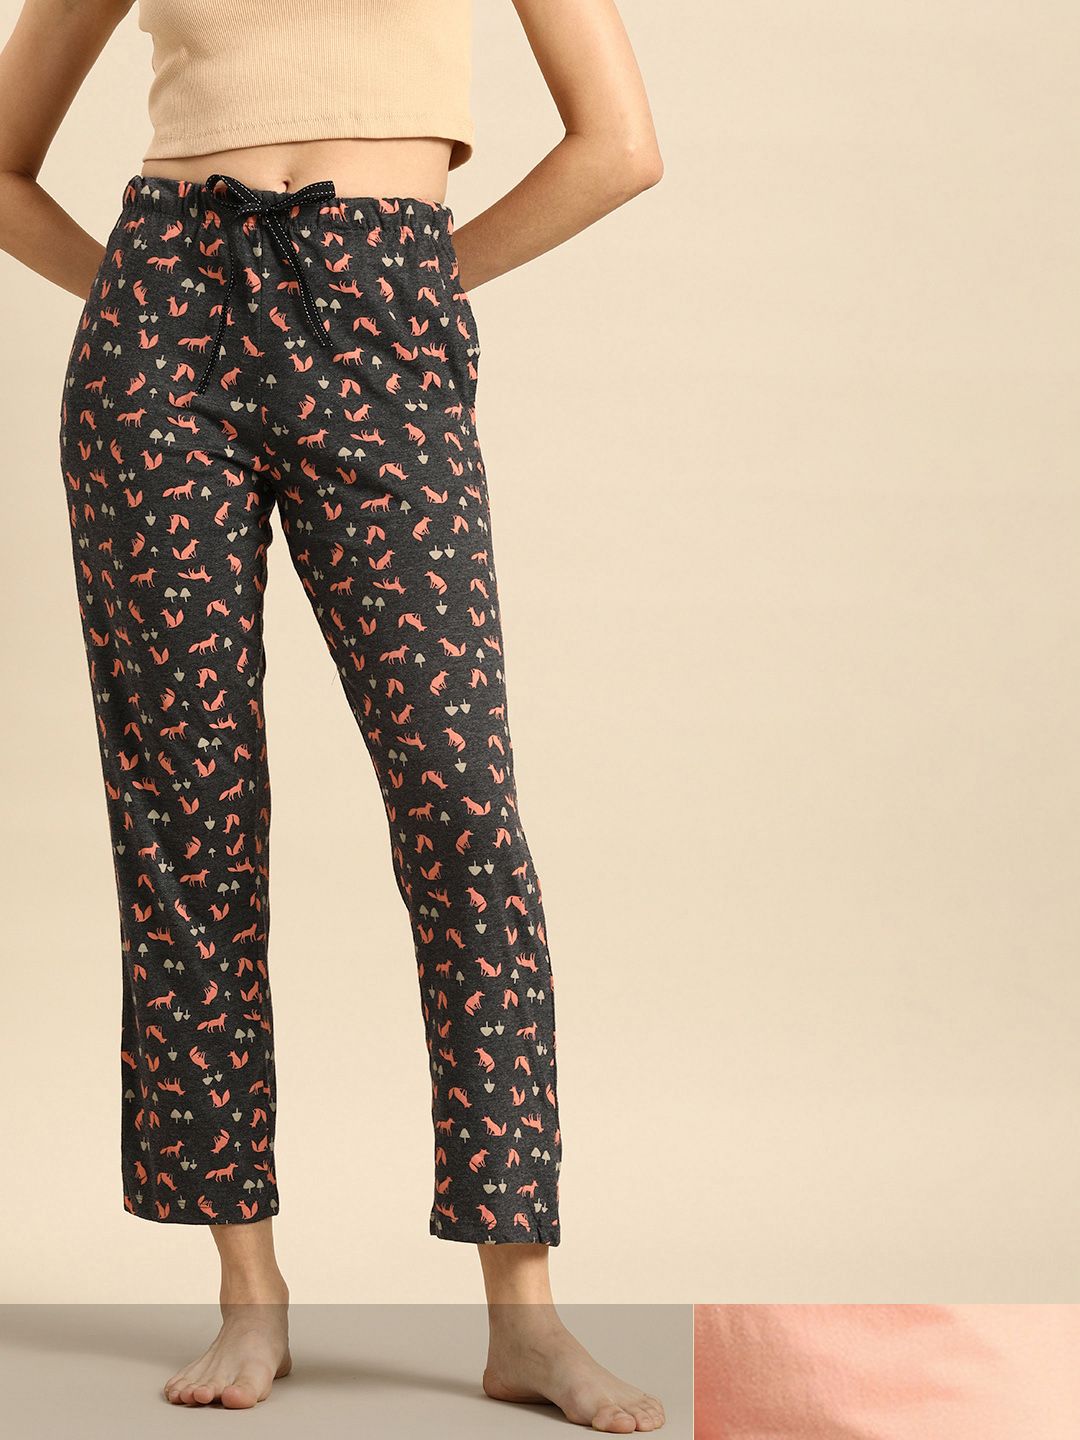 Dreamz by Pantaloons Pack of 2 Black & Coral Printed Lounge Pants Price in India